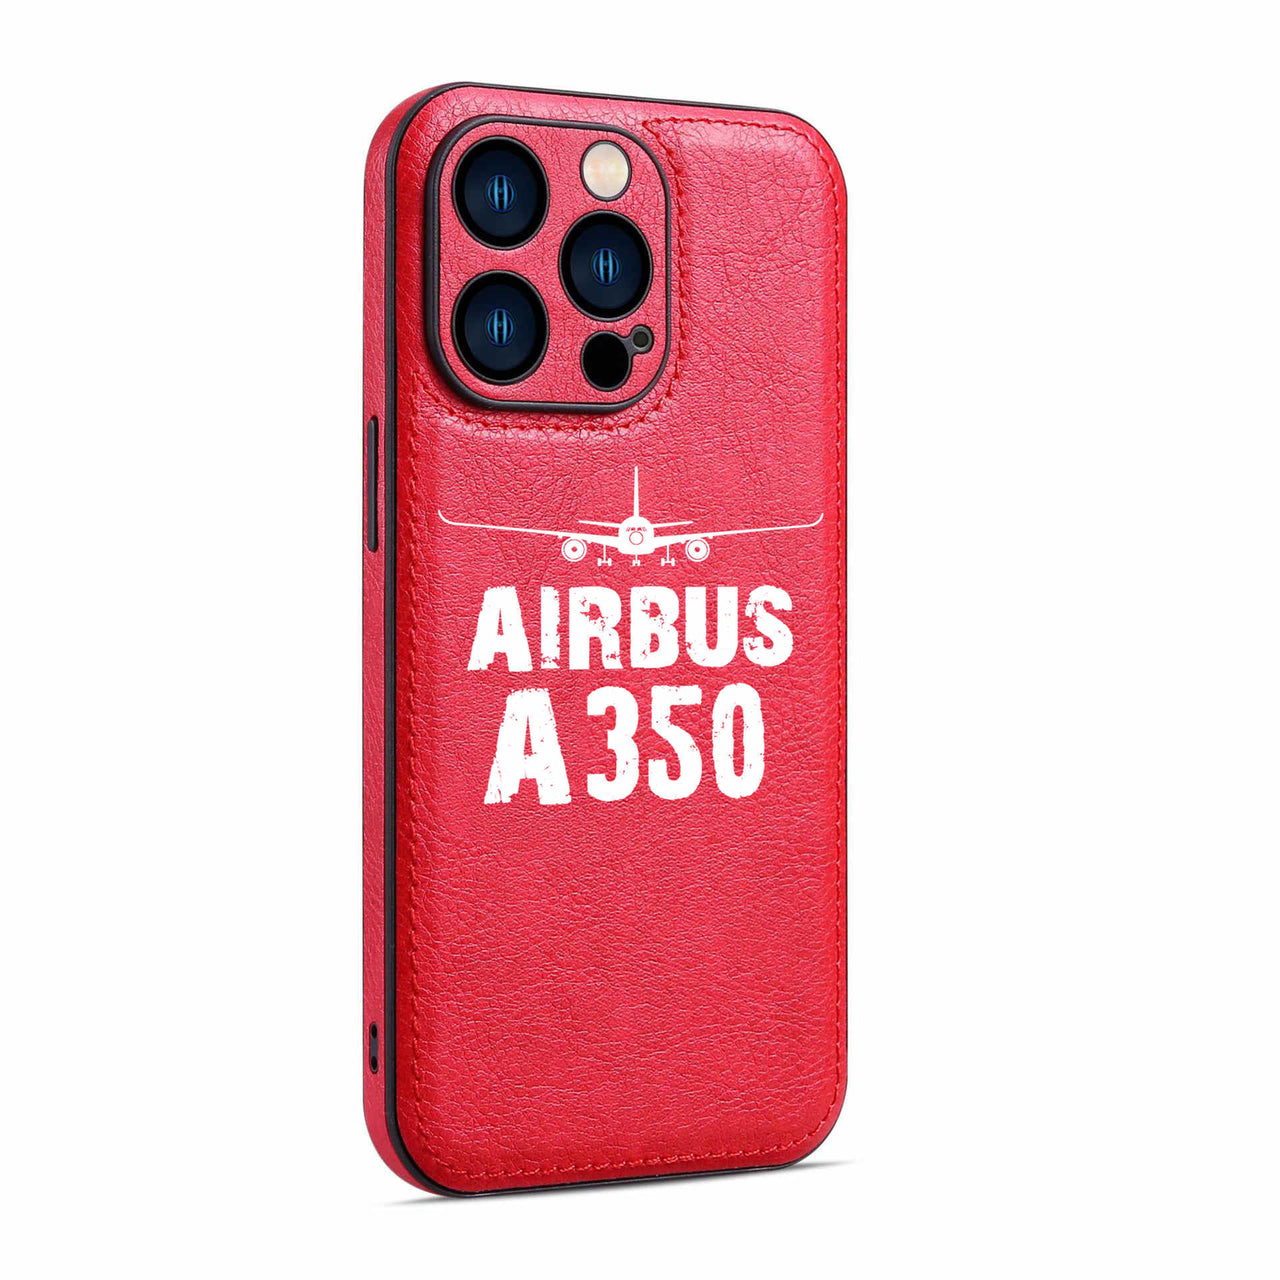 Airbus A350 & Plane Designed Leather iPhone Cases